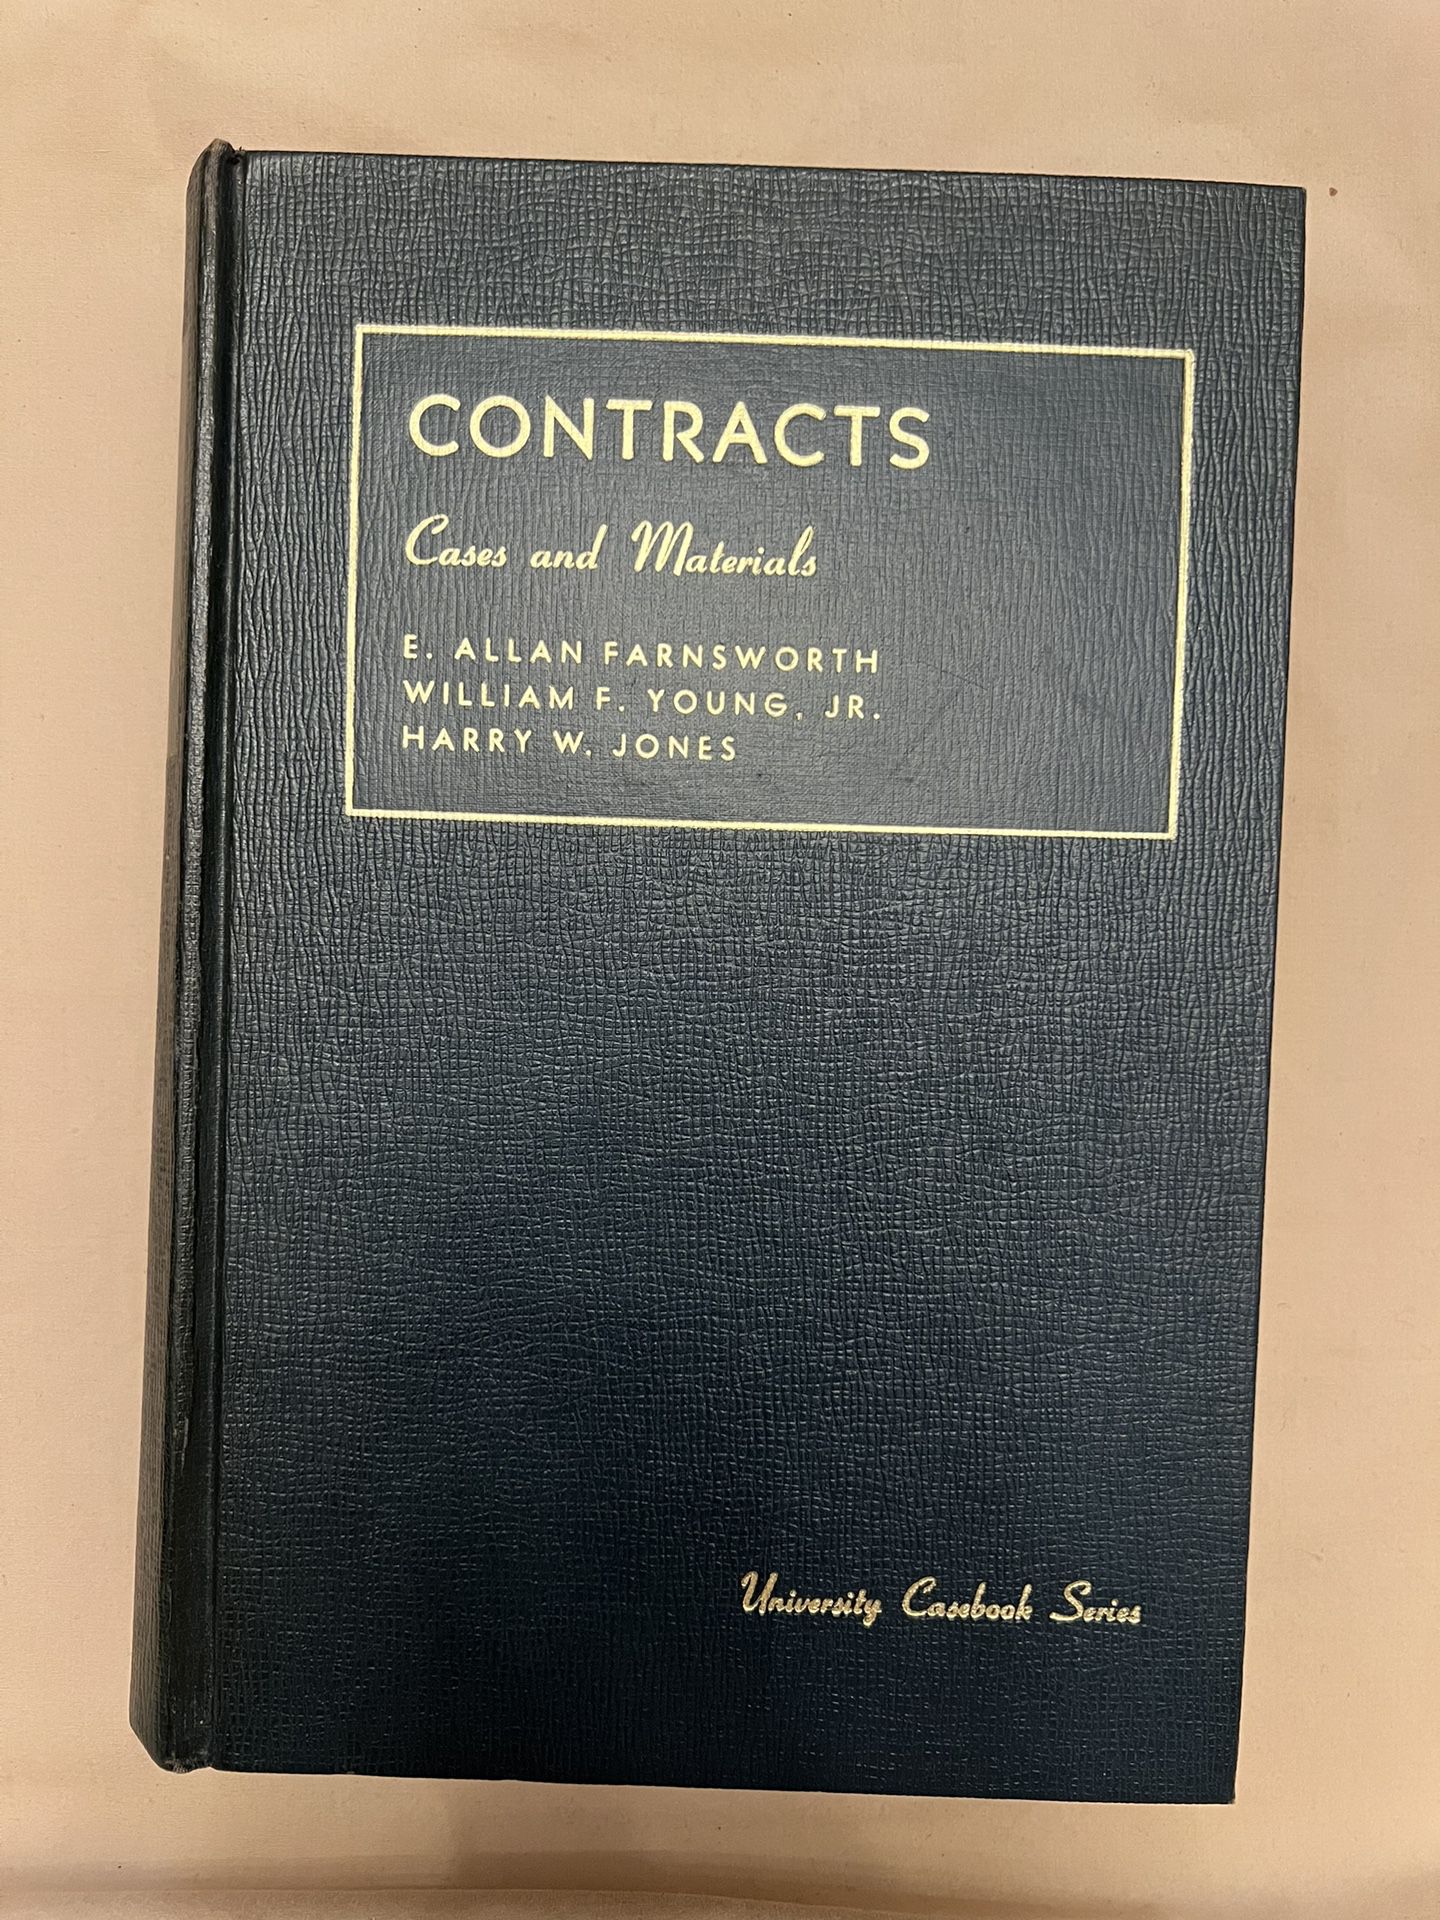 Cases And Materials On Contracts Second Edition Law Textbook 1972